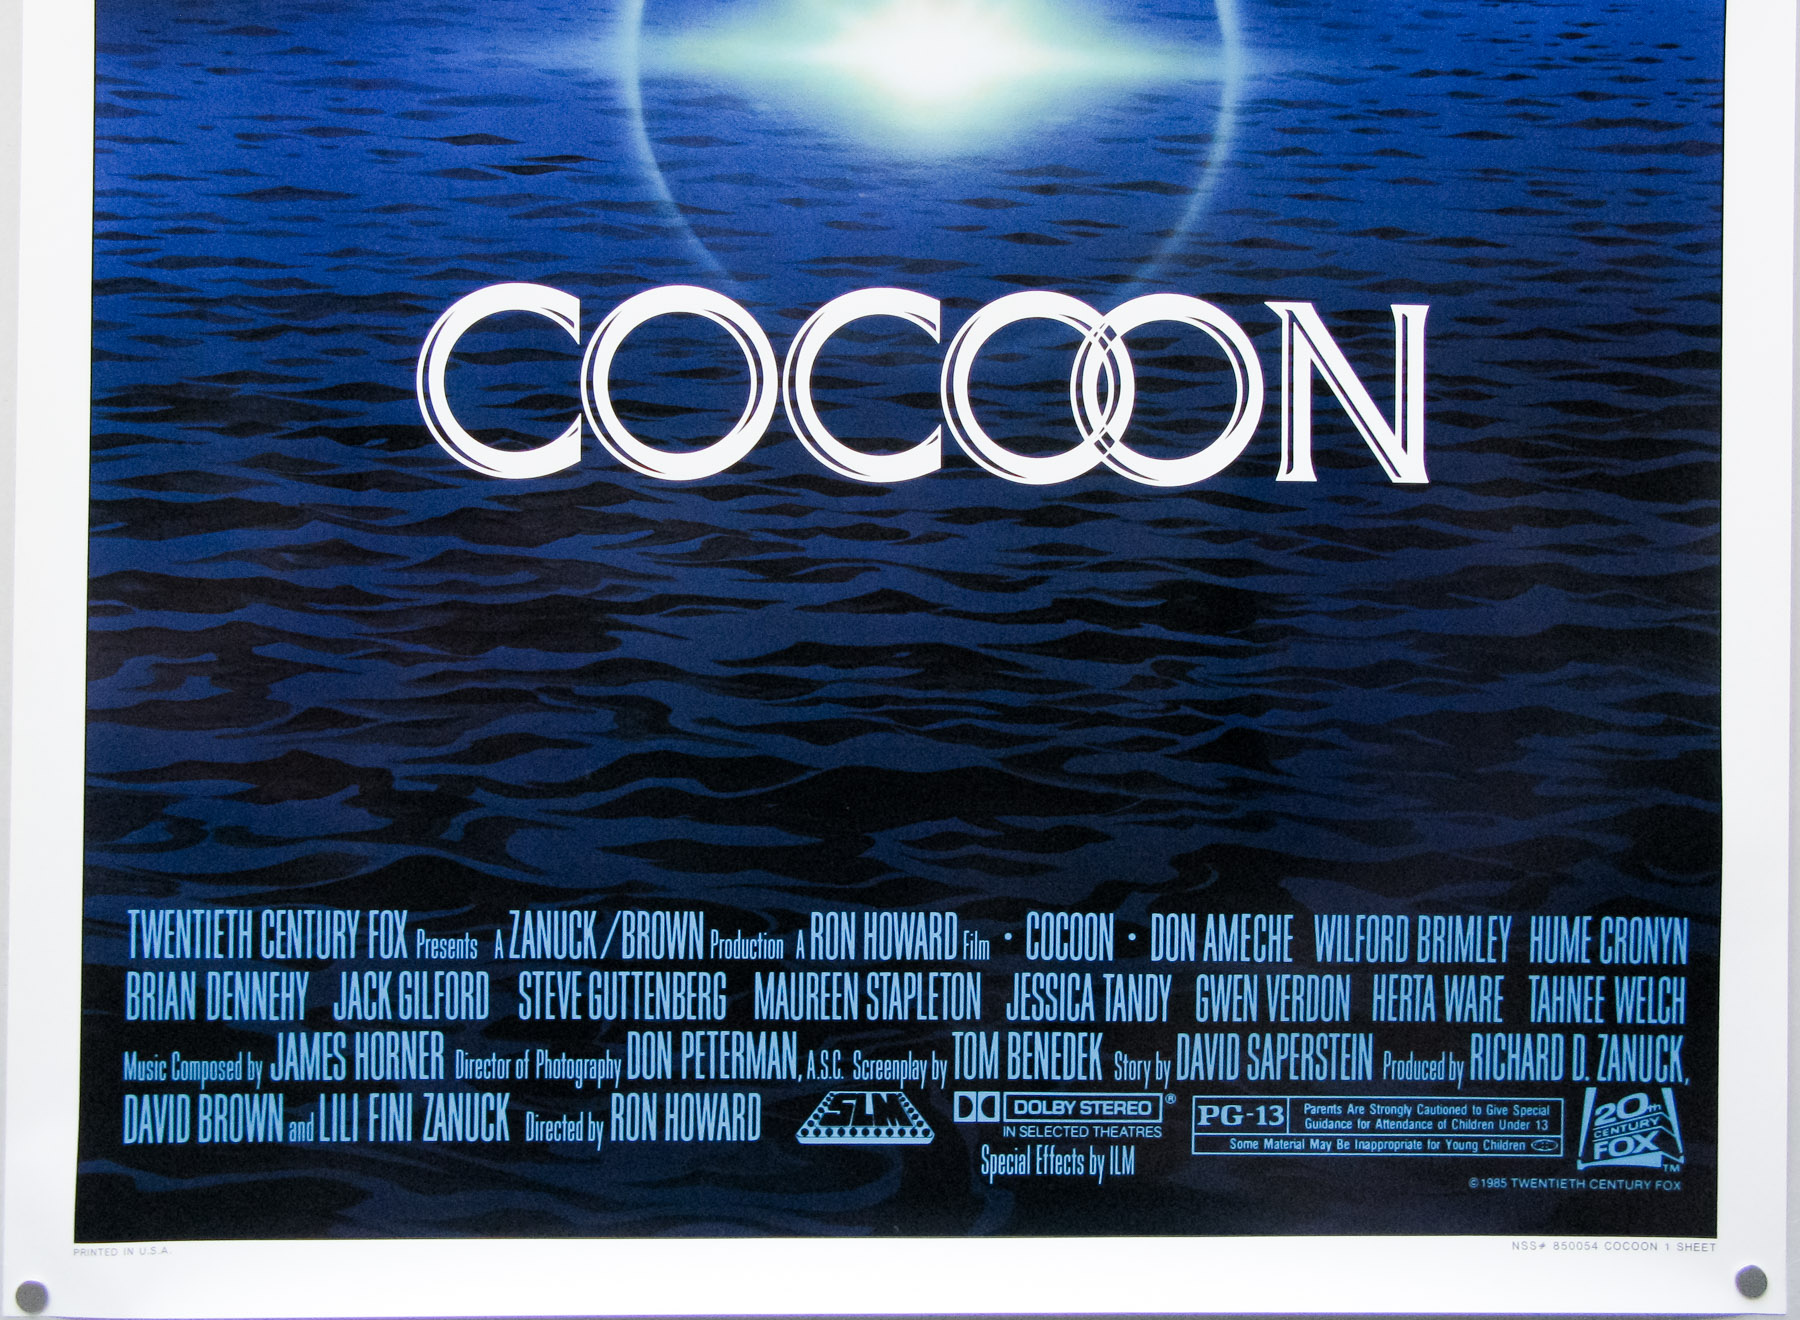 Cocoon / one sheet / USA